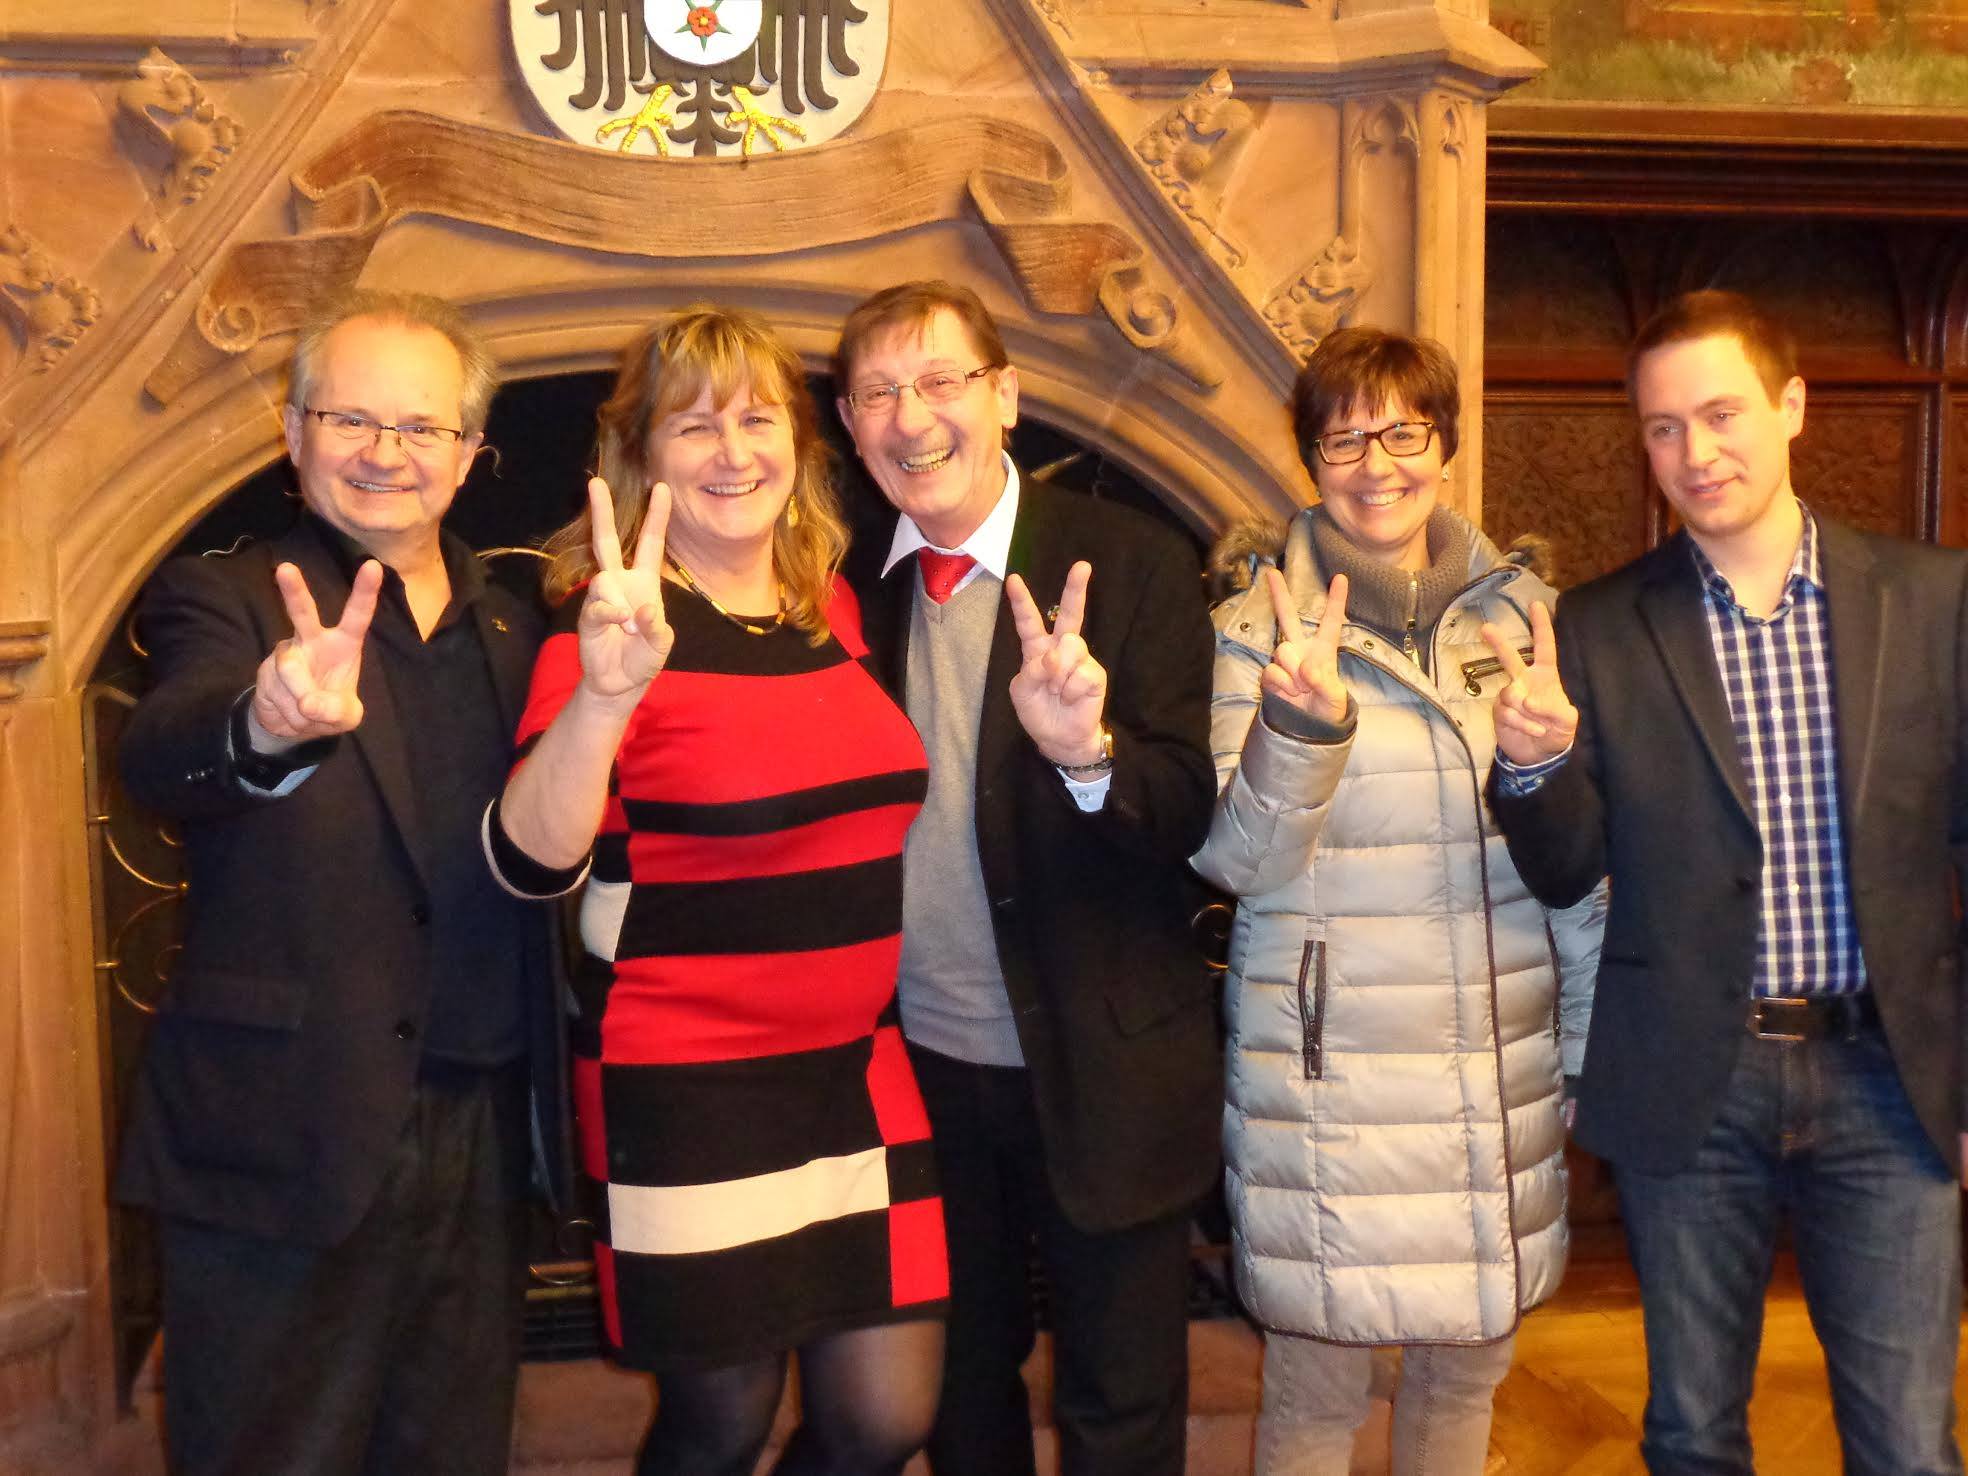 Official image for the Global Tolerance Faces Campaign in the historic town hall of Saarbrücken in Germany. In front of the fireplace are united party-wide from left to right all together to send greetings to the founder Madame Sabine Balve, who was born in Saarbruecken